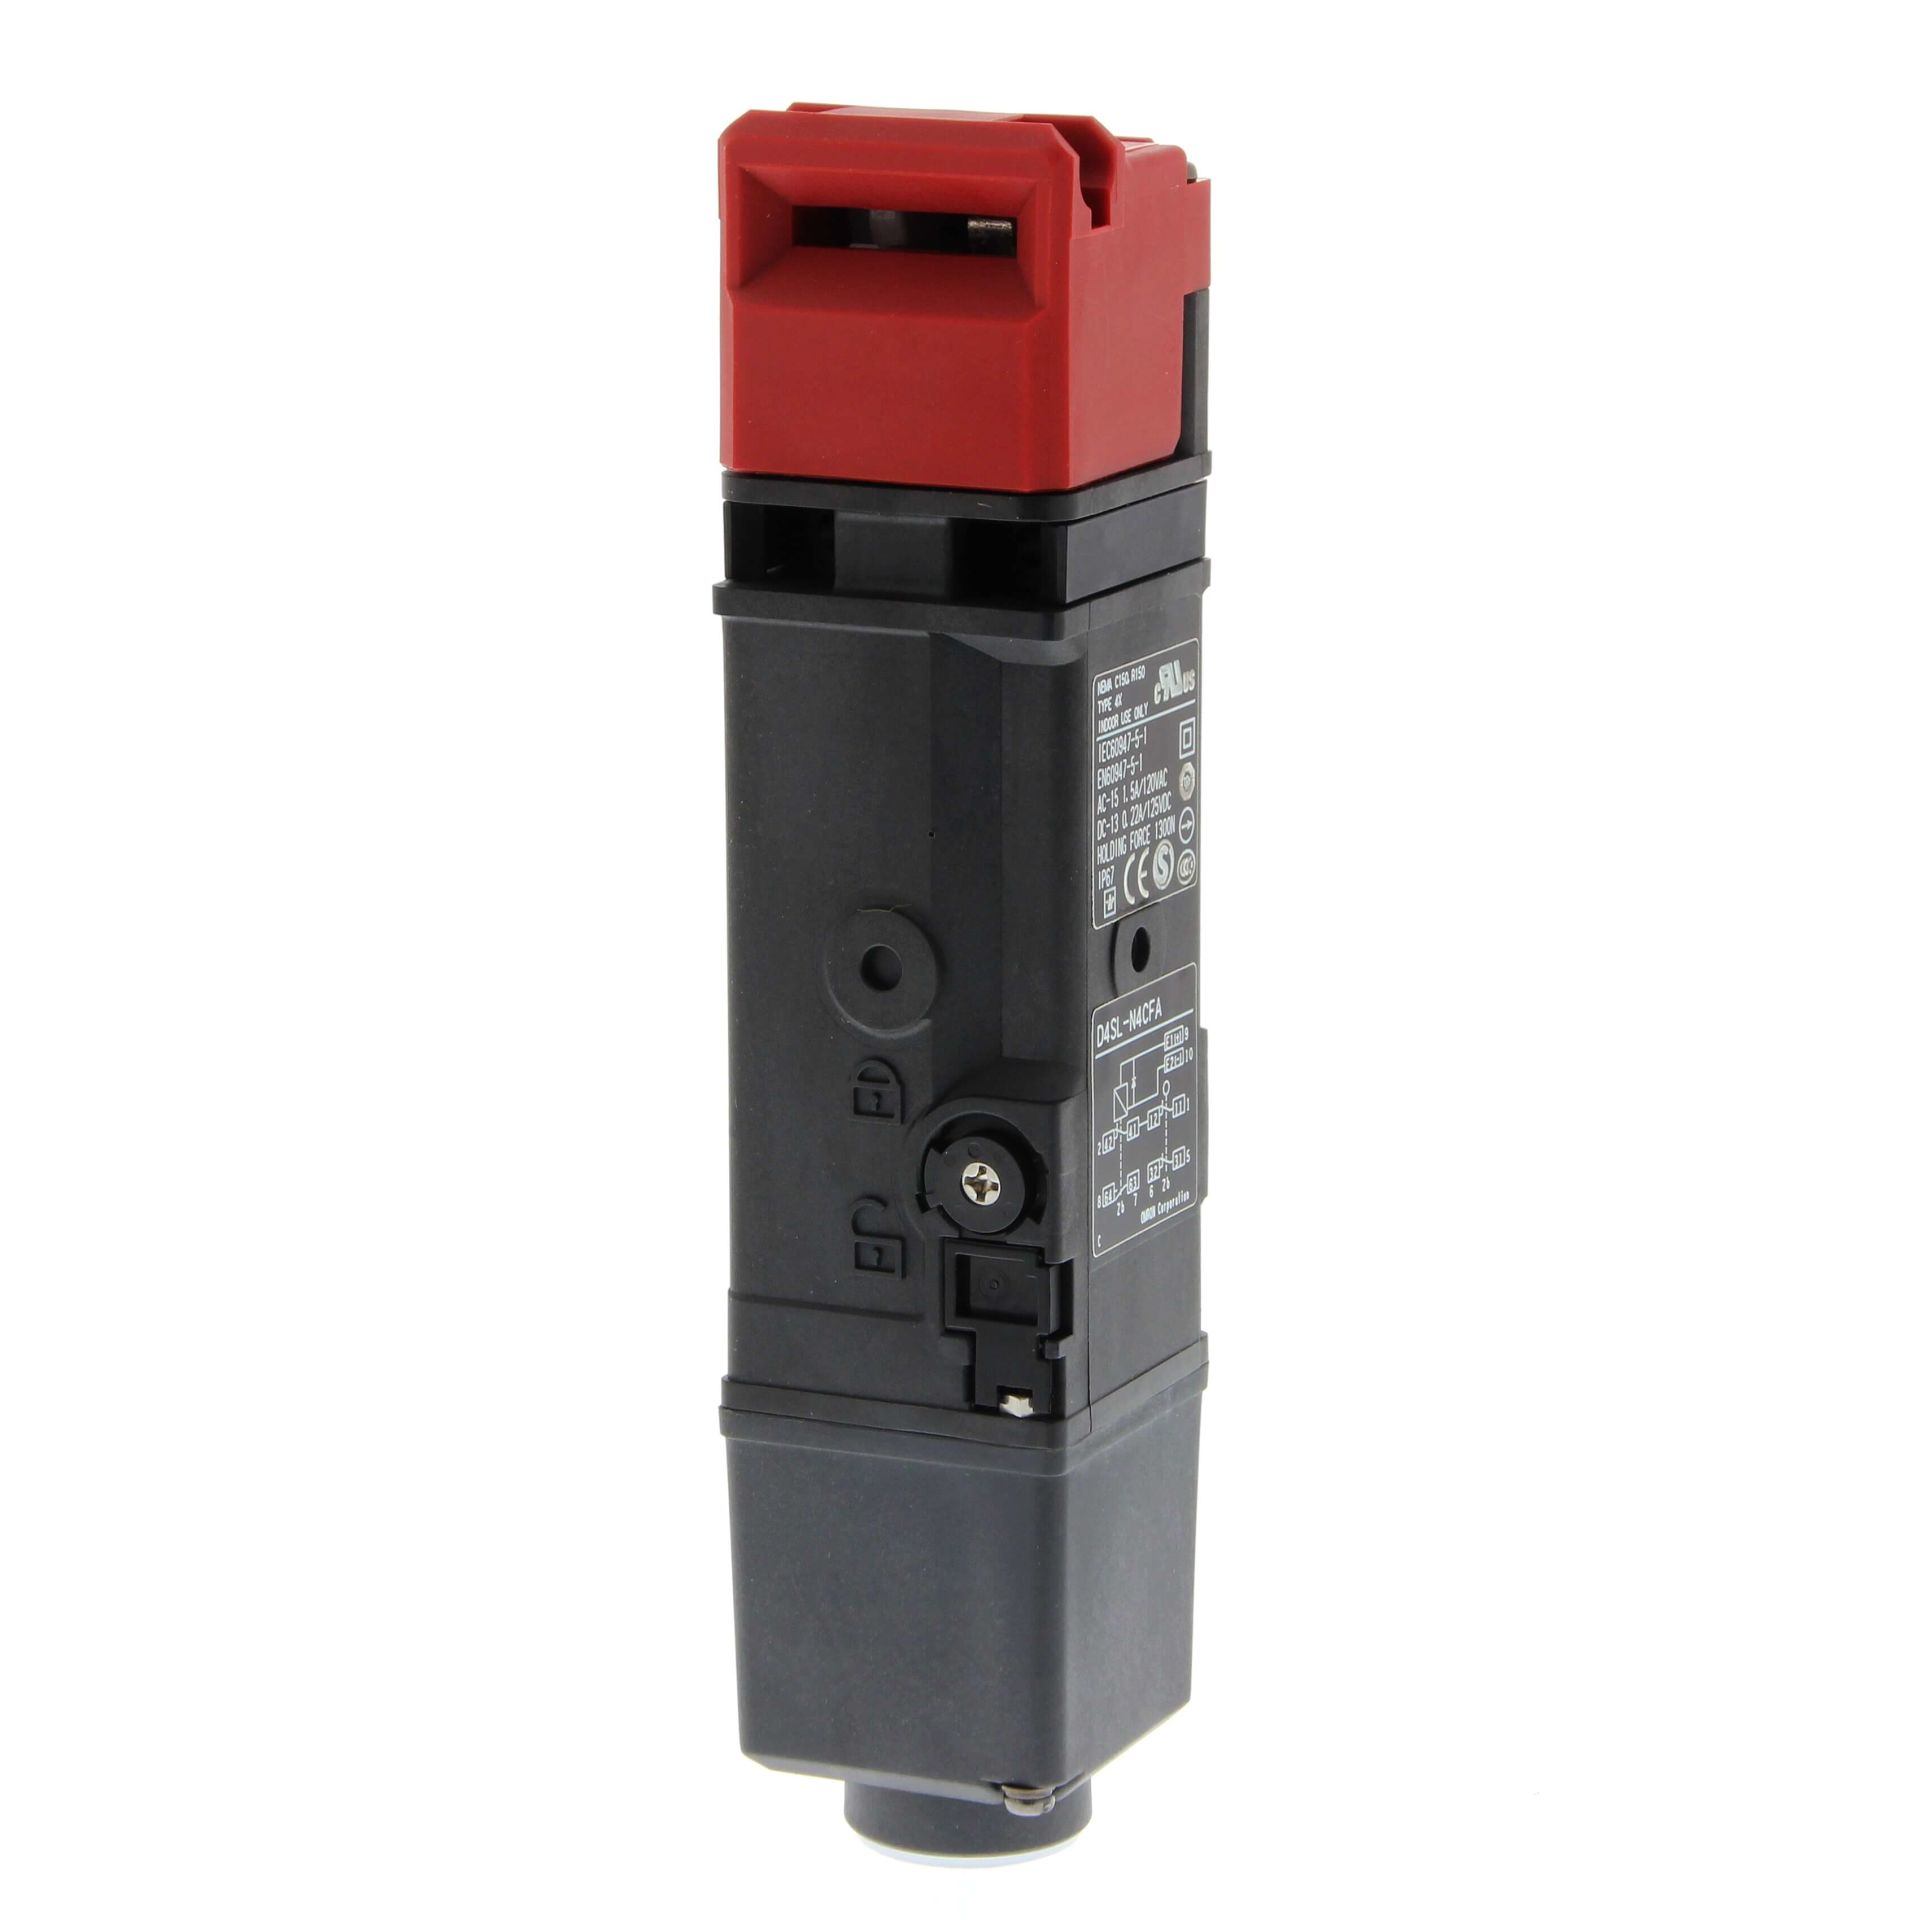 Omron - D4SL-N4EFA-D4  Door locking switch, M20, 2NC/1NO + 1NC/1NO, head: resin, Mechanical lock/24VDC solenoid release, LED indicator, special release key